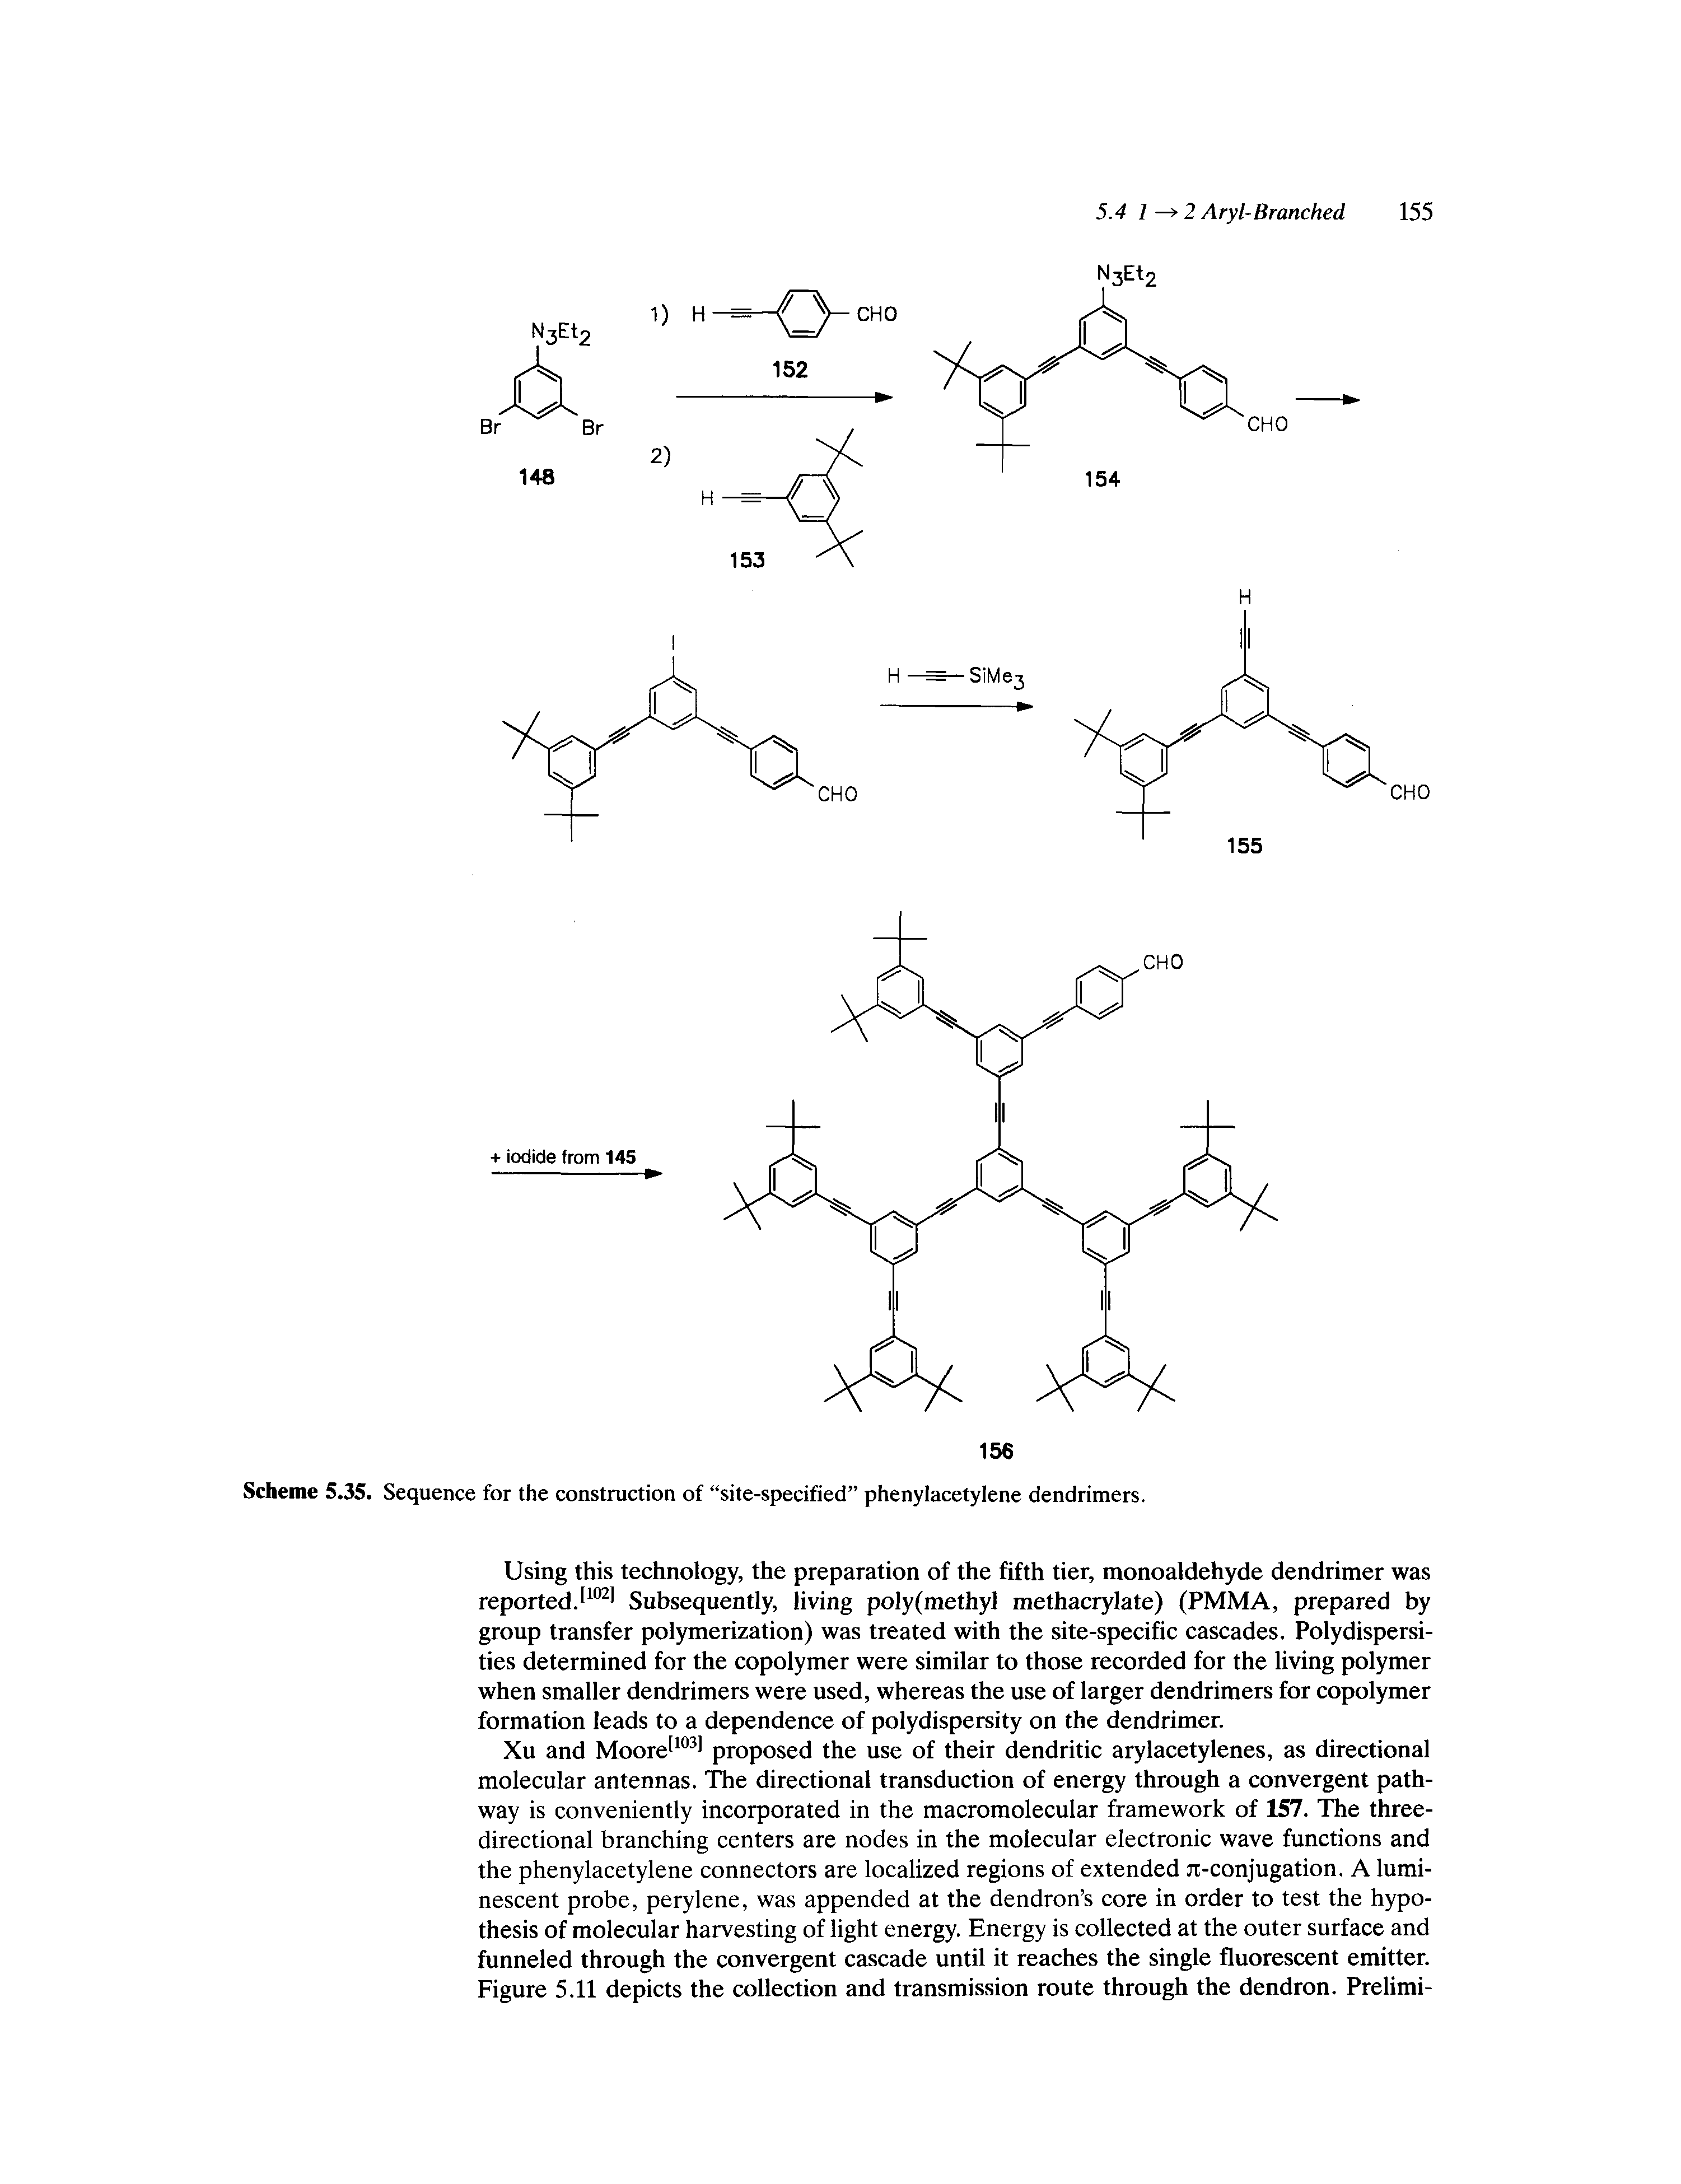 Scheme 5.35. Sequence for the construction of site-specified phenylacetylene dendrimers.